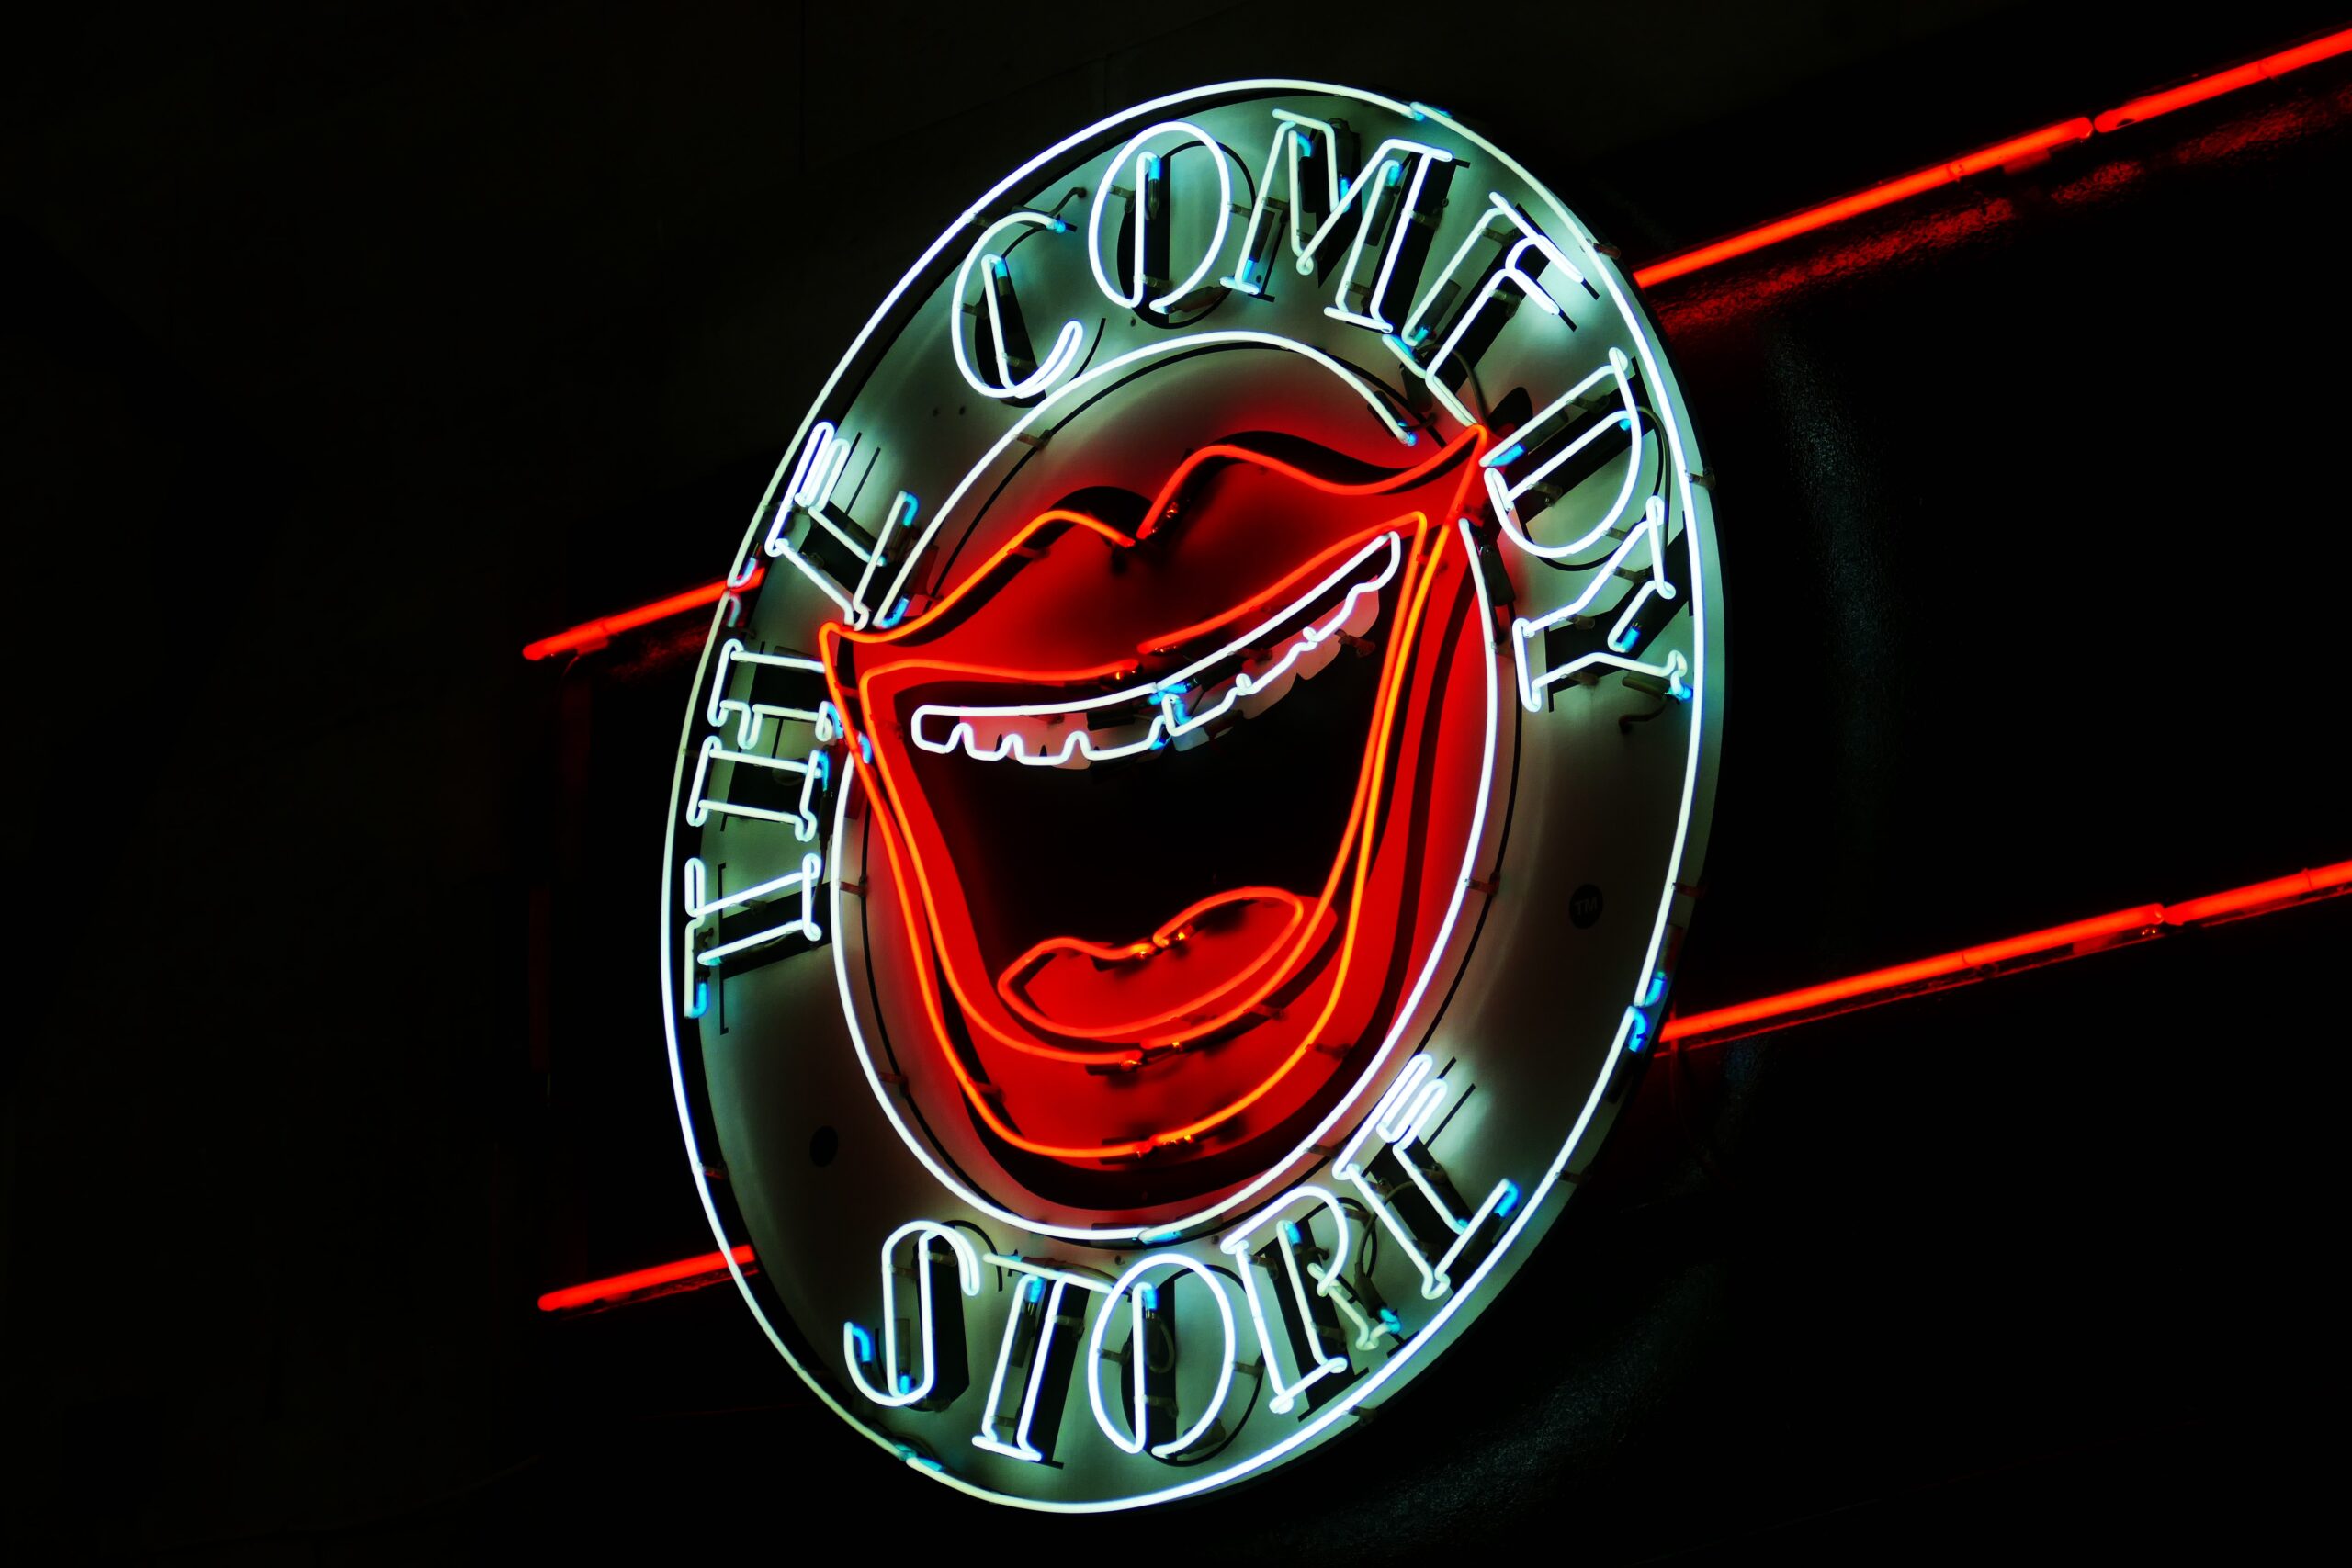 The Comedy Store neon sign